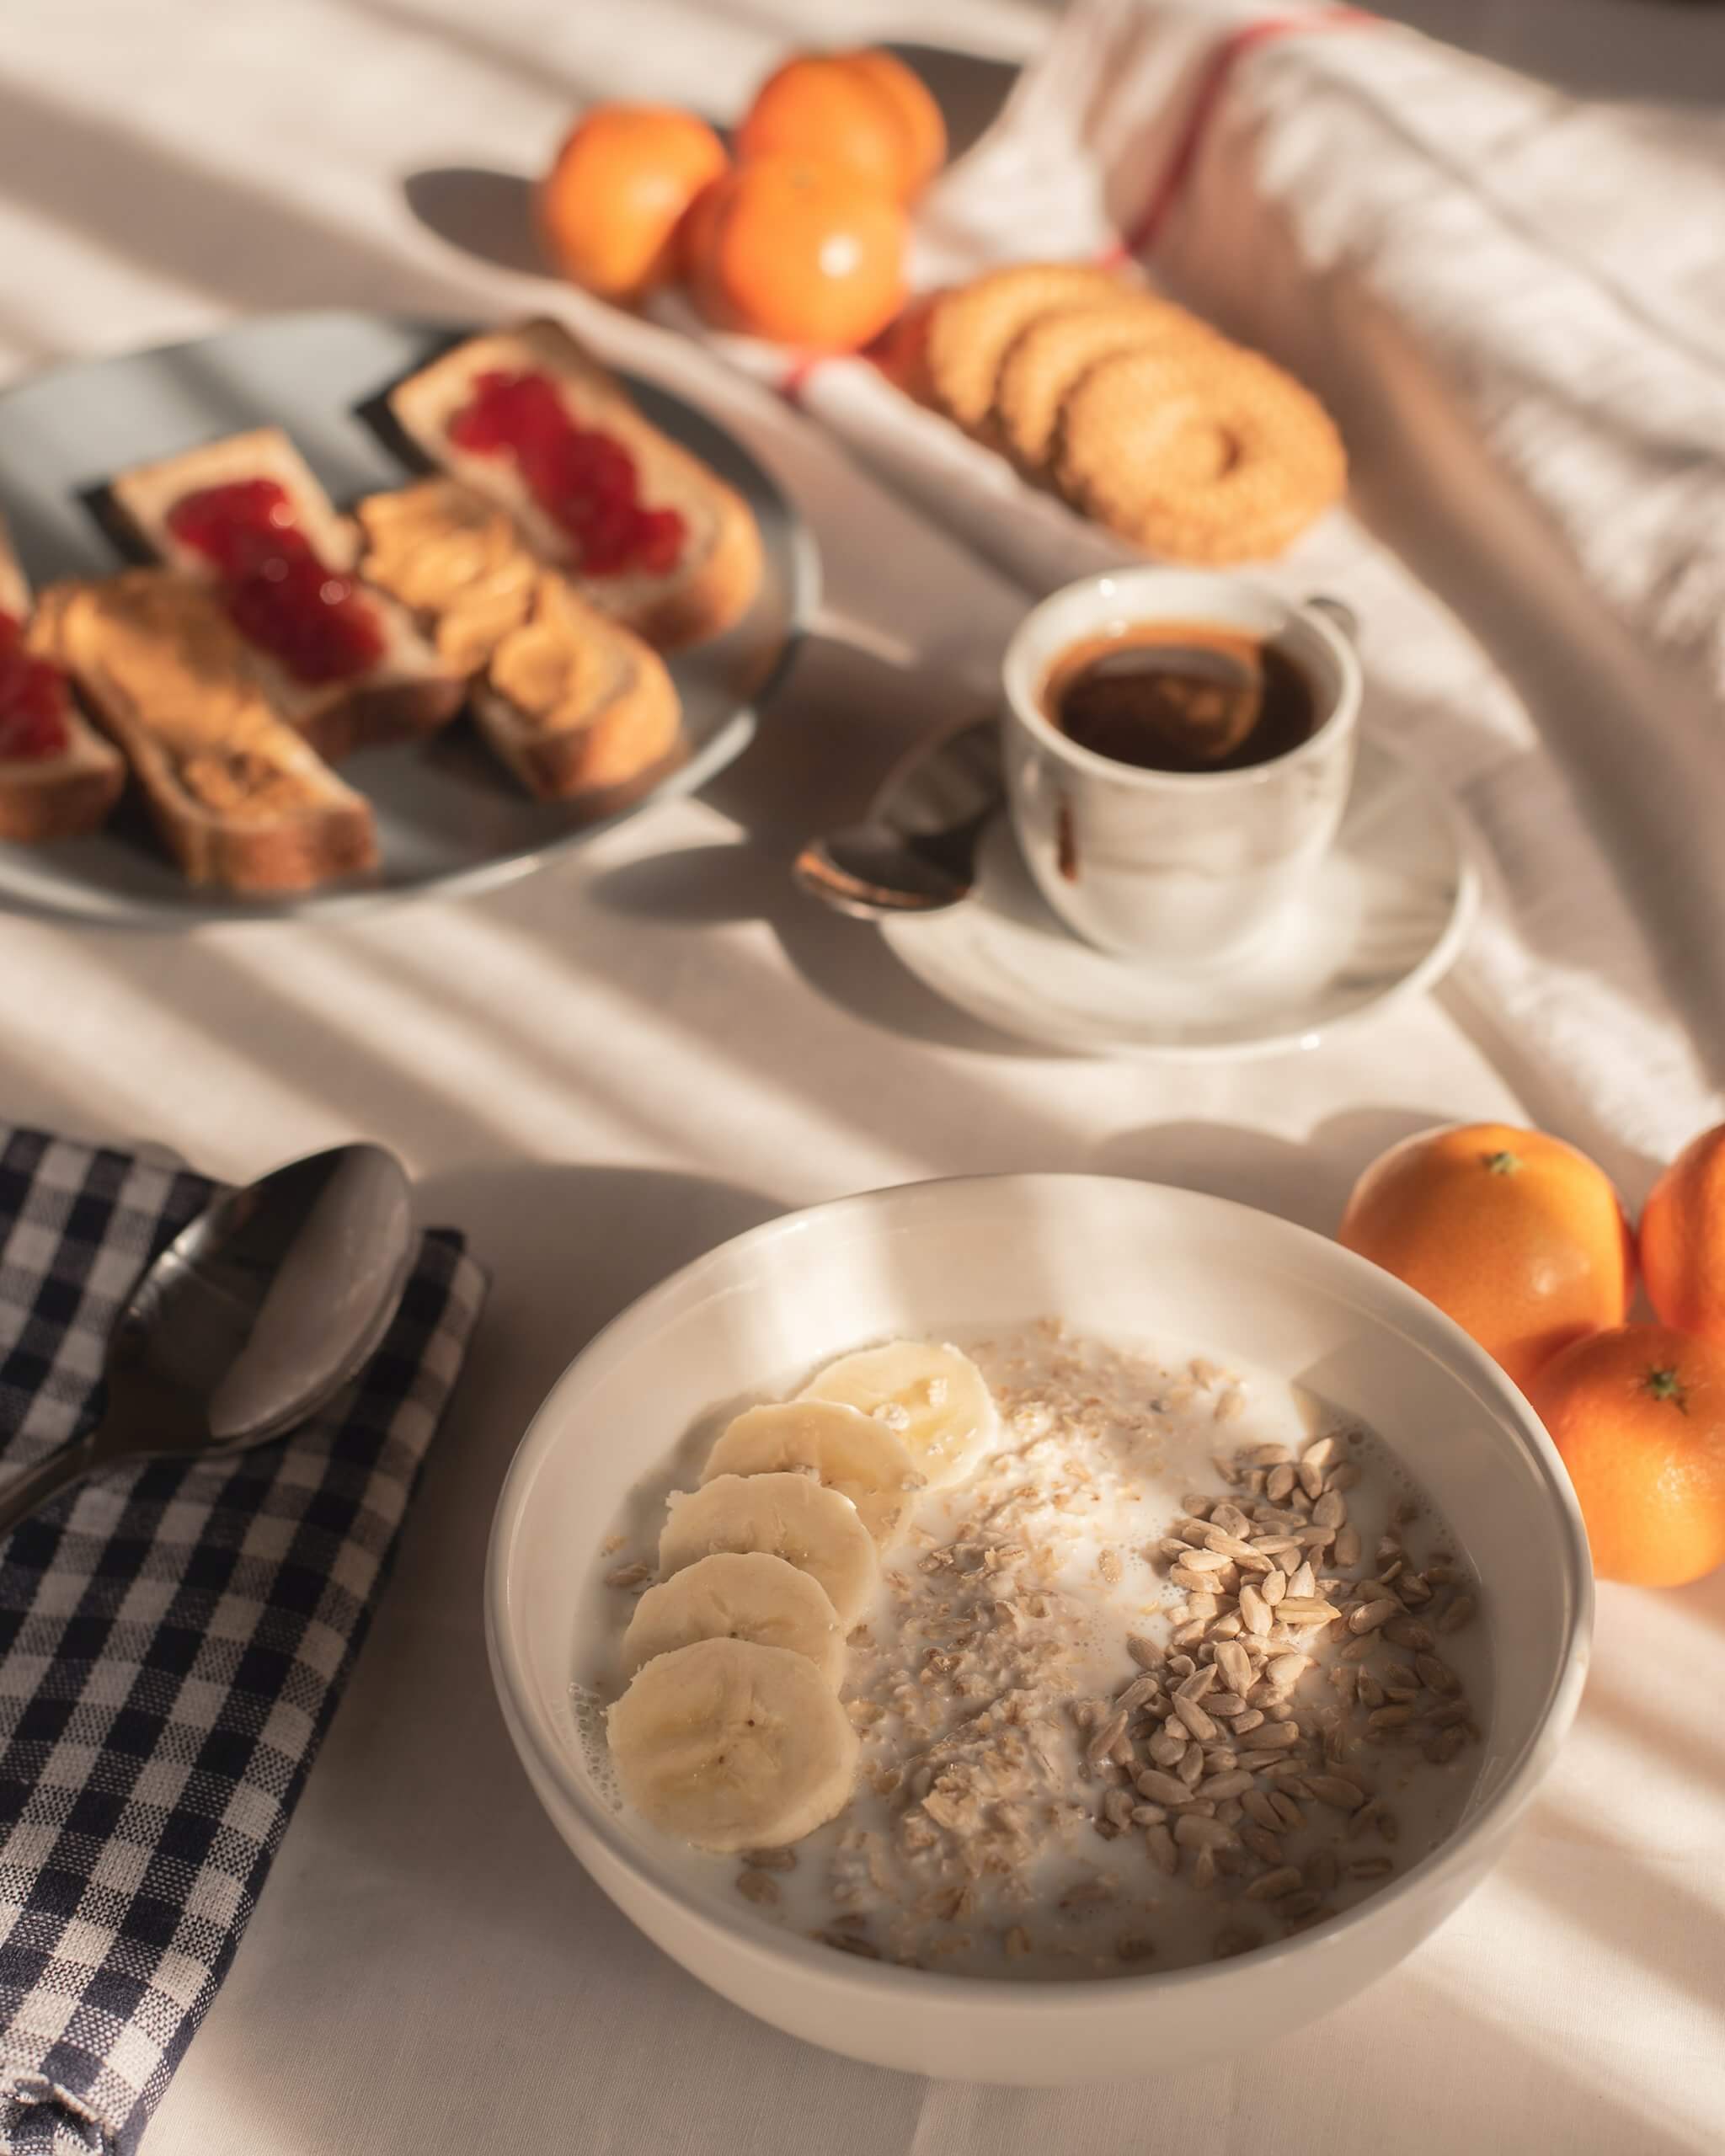 A table with oatmeal, pastries, and coffee for breakfast.